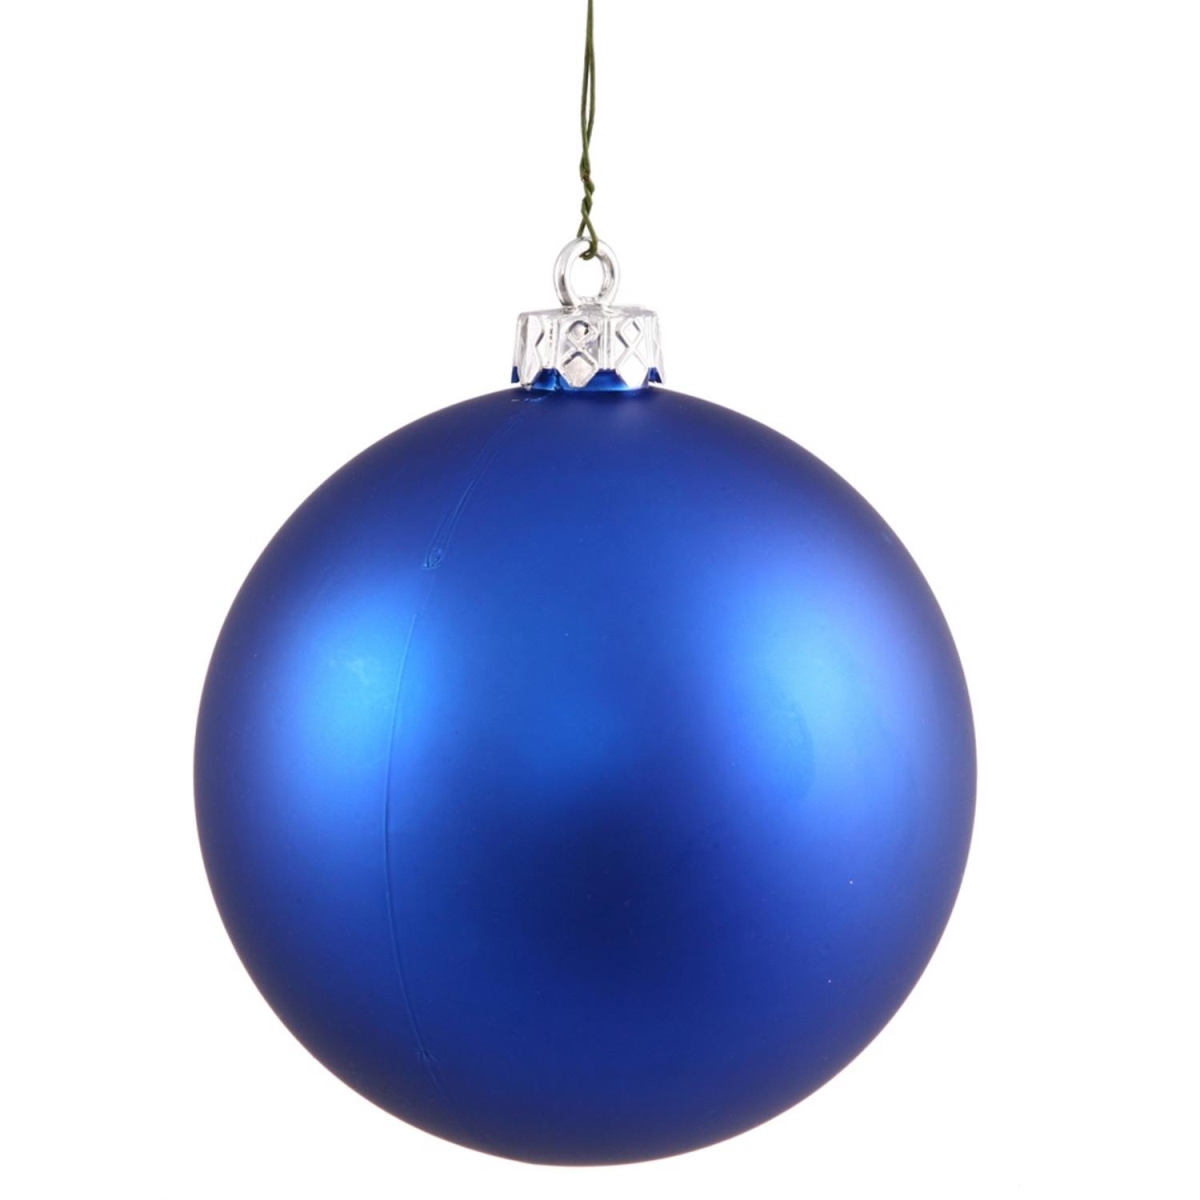 31749091 Matte Blue Uv Resistant Commercial Drilled Shatterproof Christmas Ball Ornament - 2.75 In.